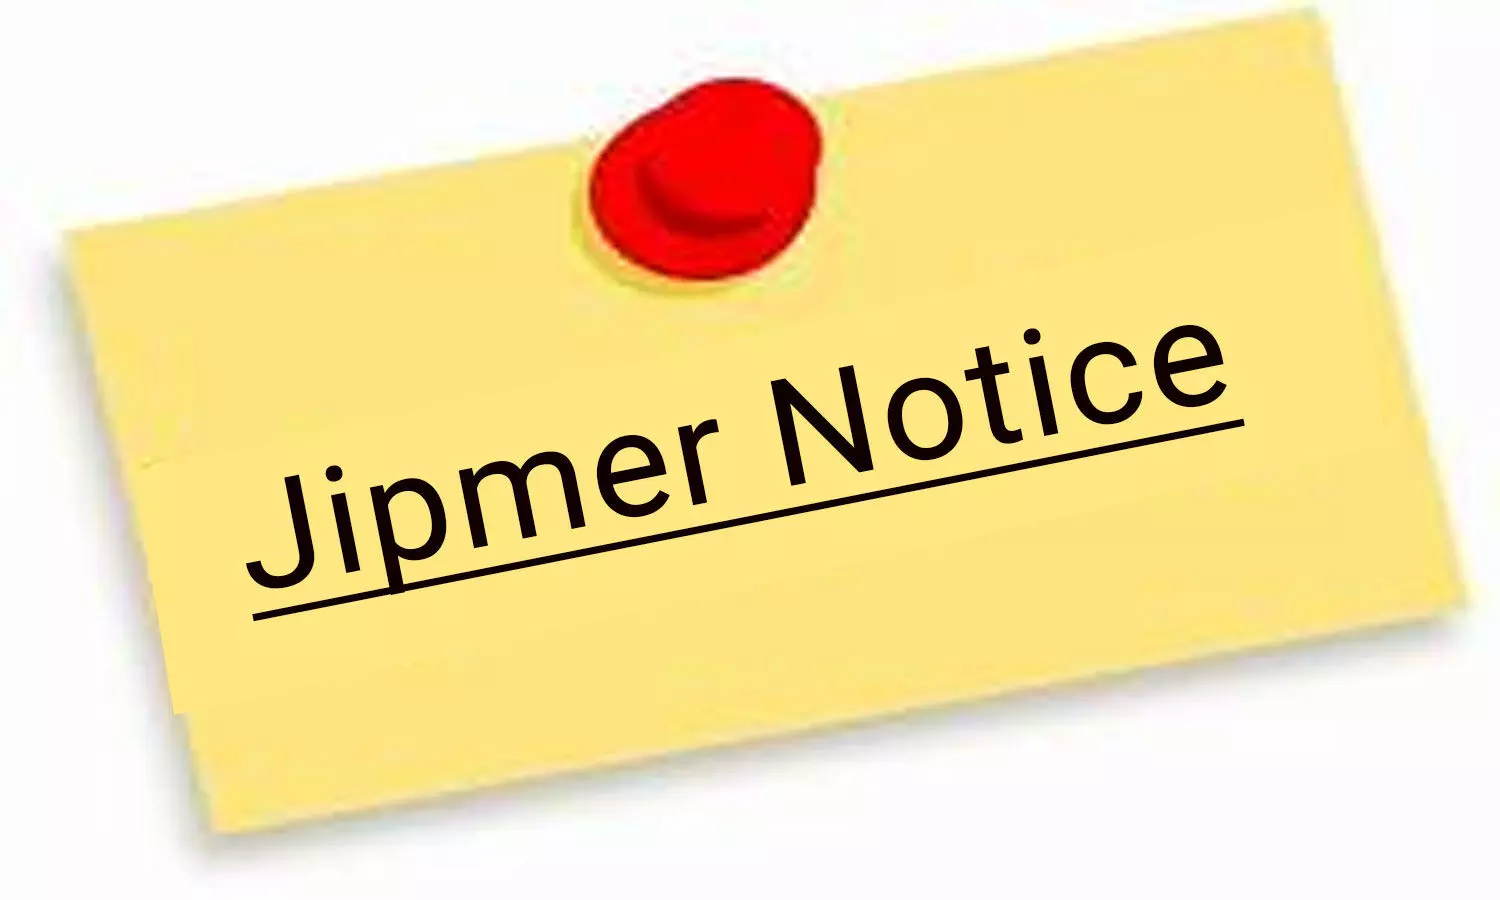 MD, MS, DM, MCh, MDS admissions via INI-CET 2020: JIPMER issues notice